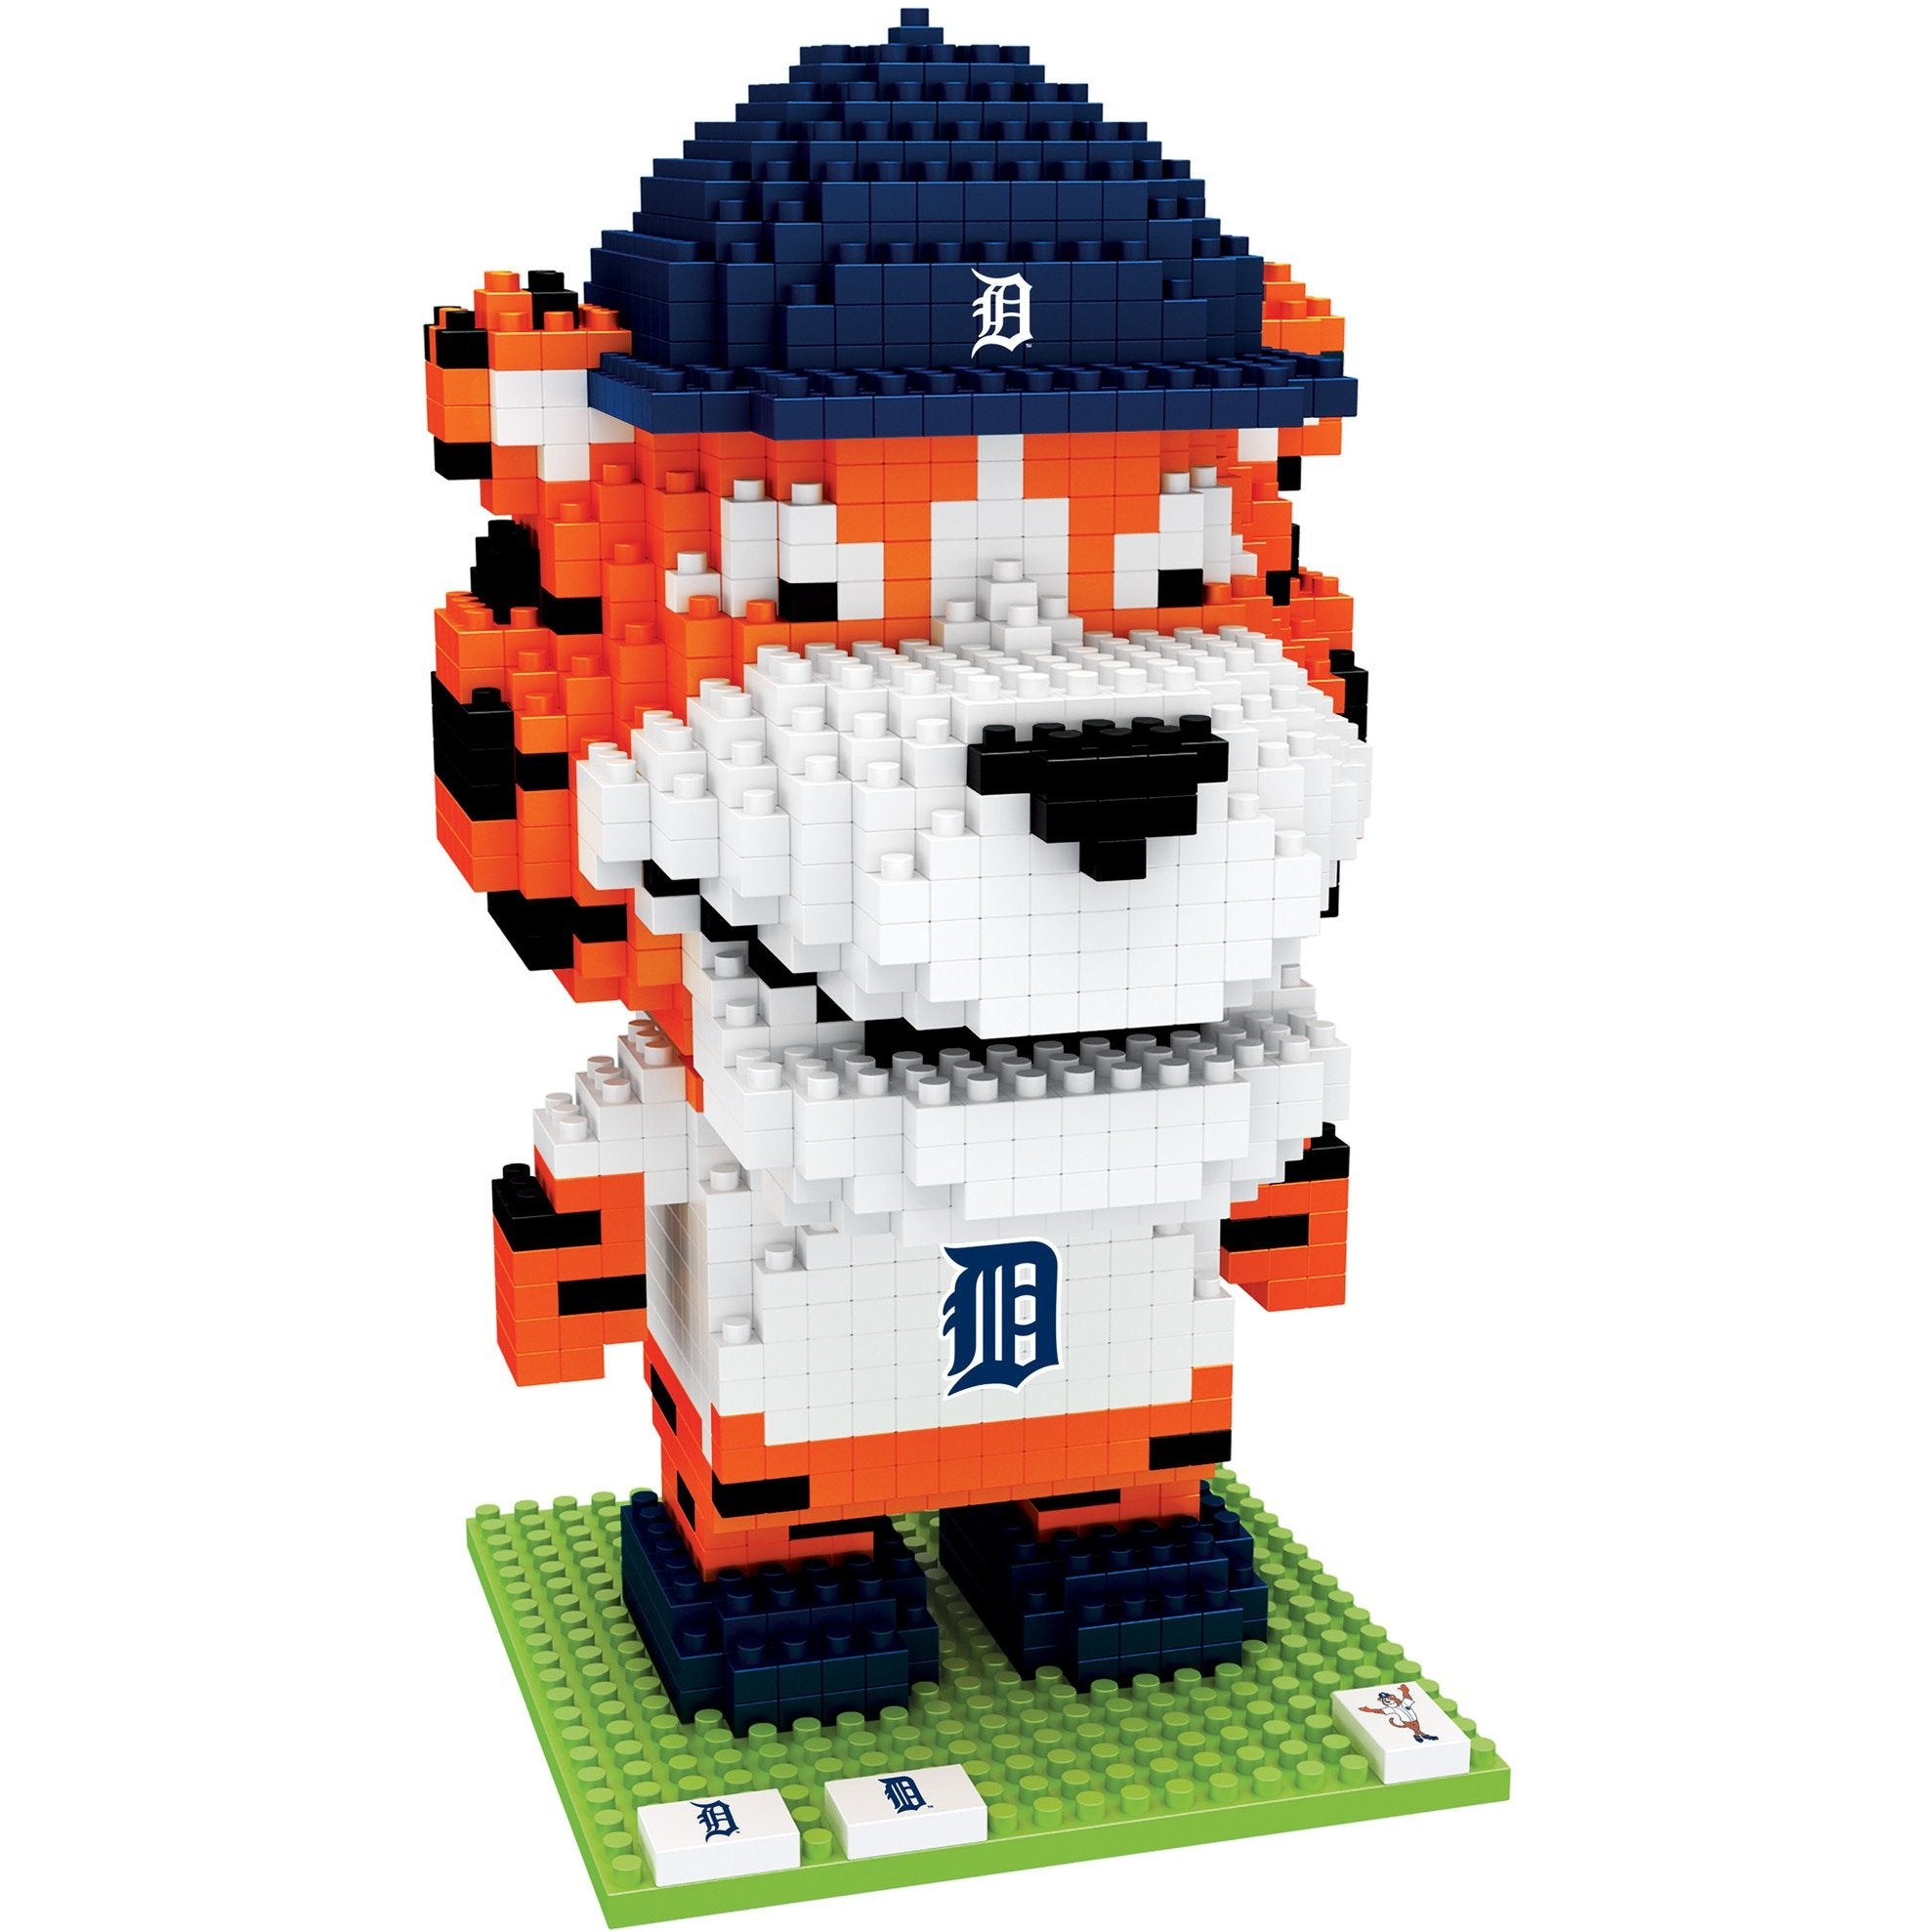 Detroit, Michigan - Paws, the mascot of the Detroit Tigers